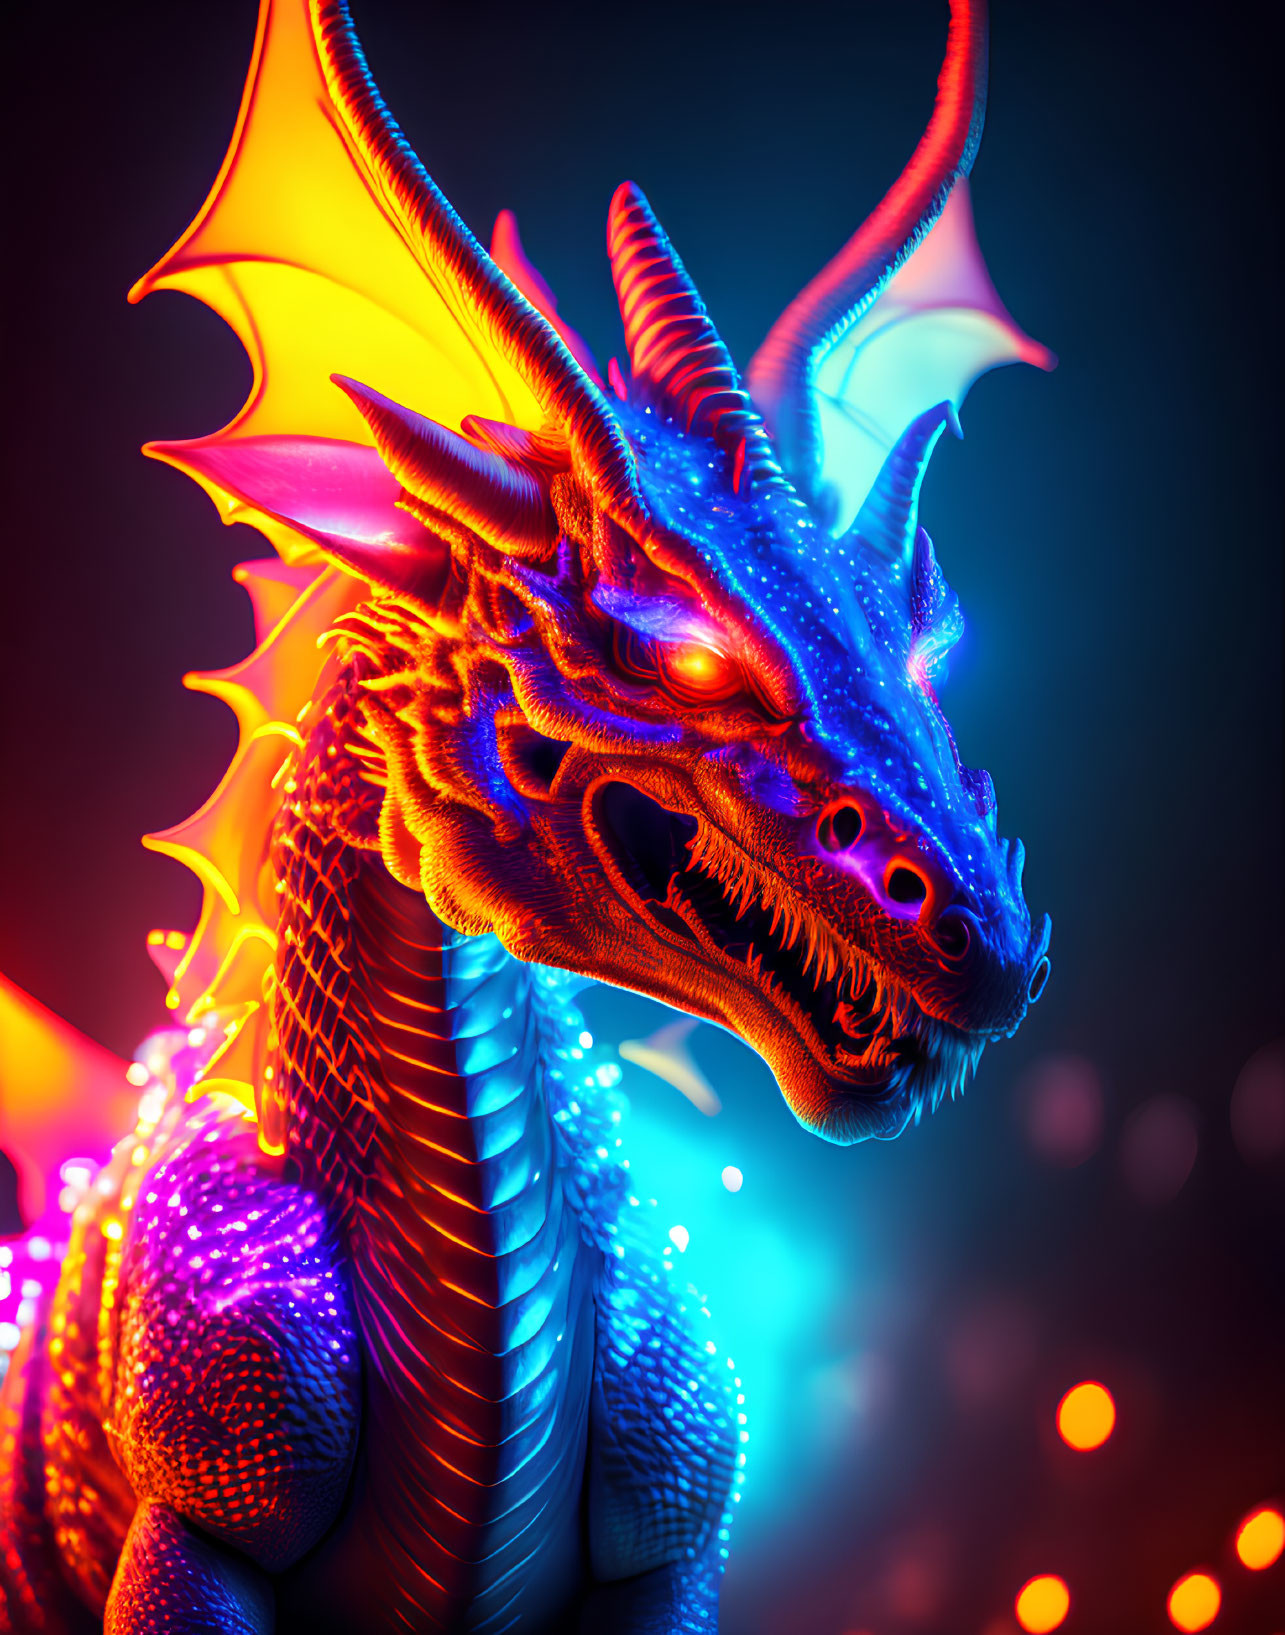 Blue dragon with orange accents, glowing eyes, intricate scales on dark bokeh-lit background